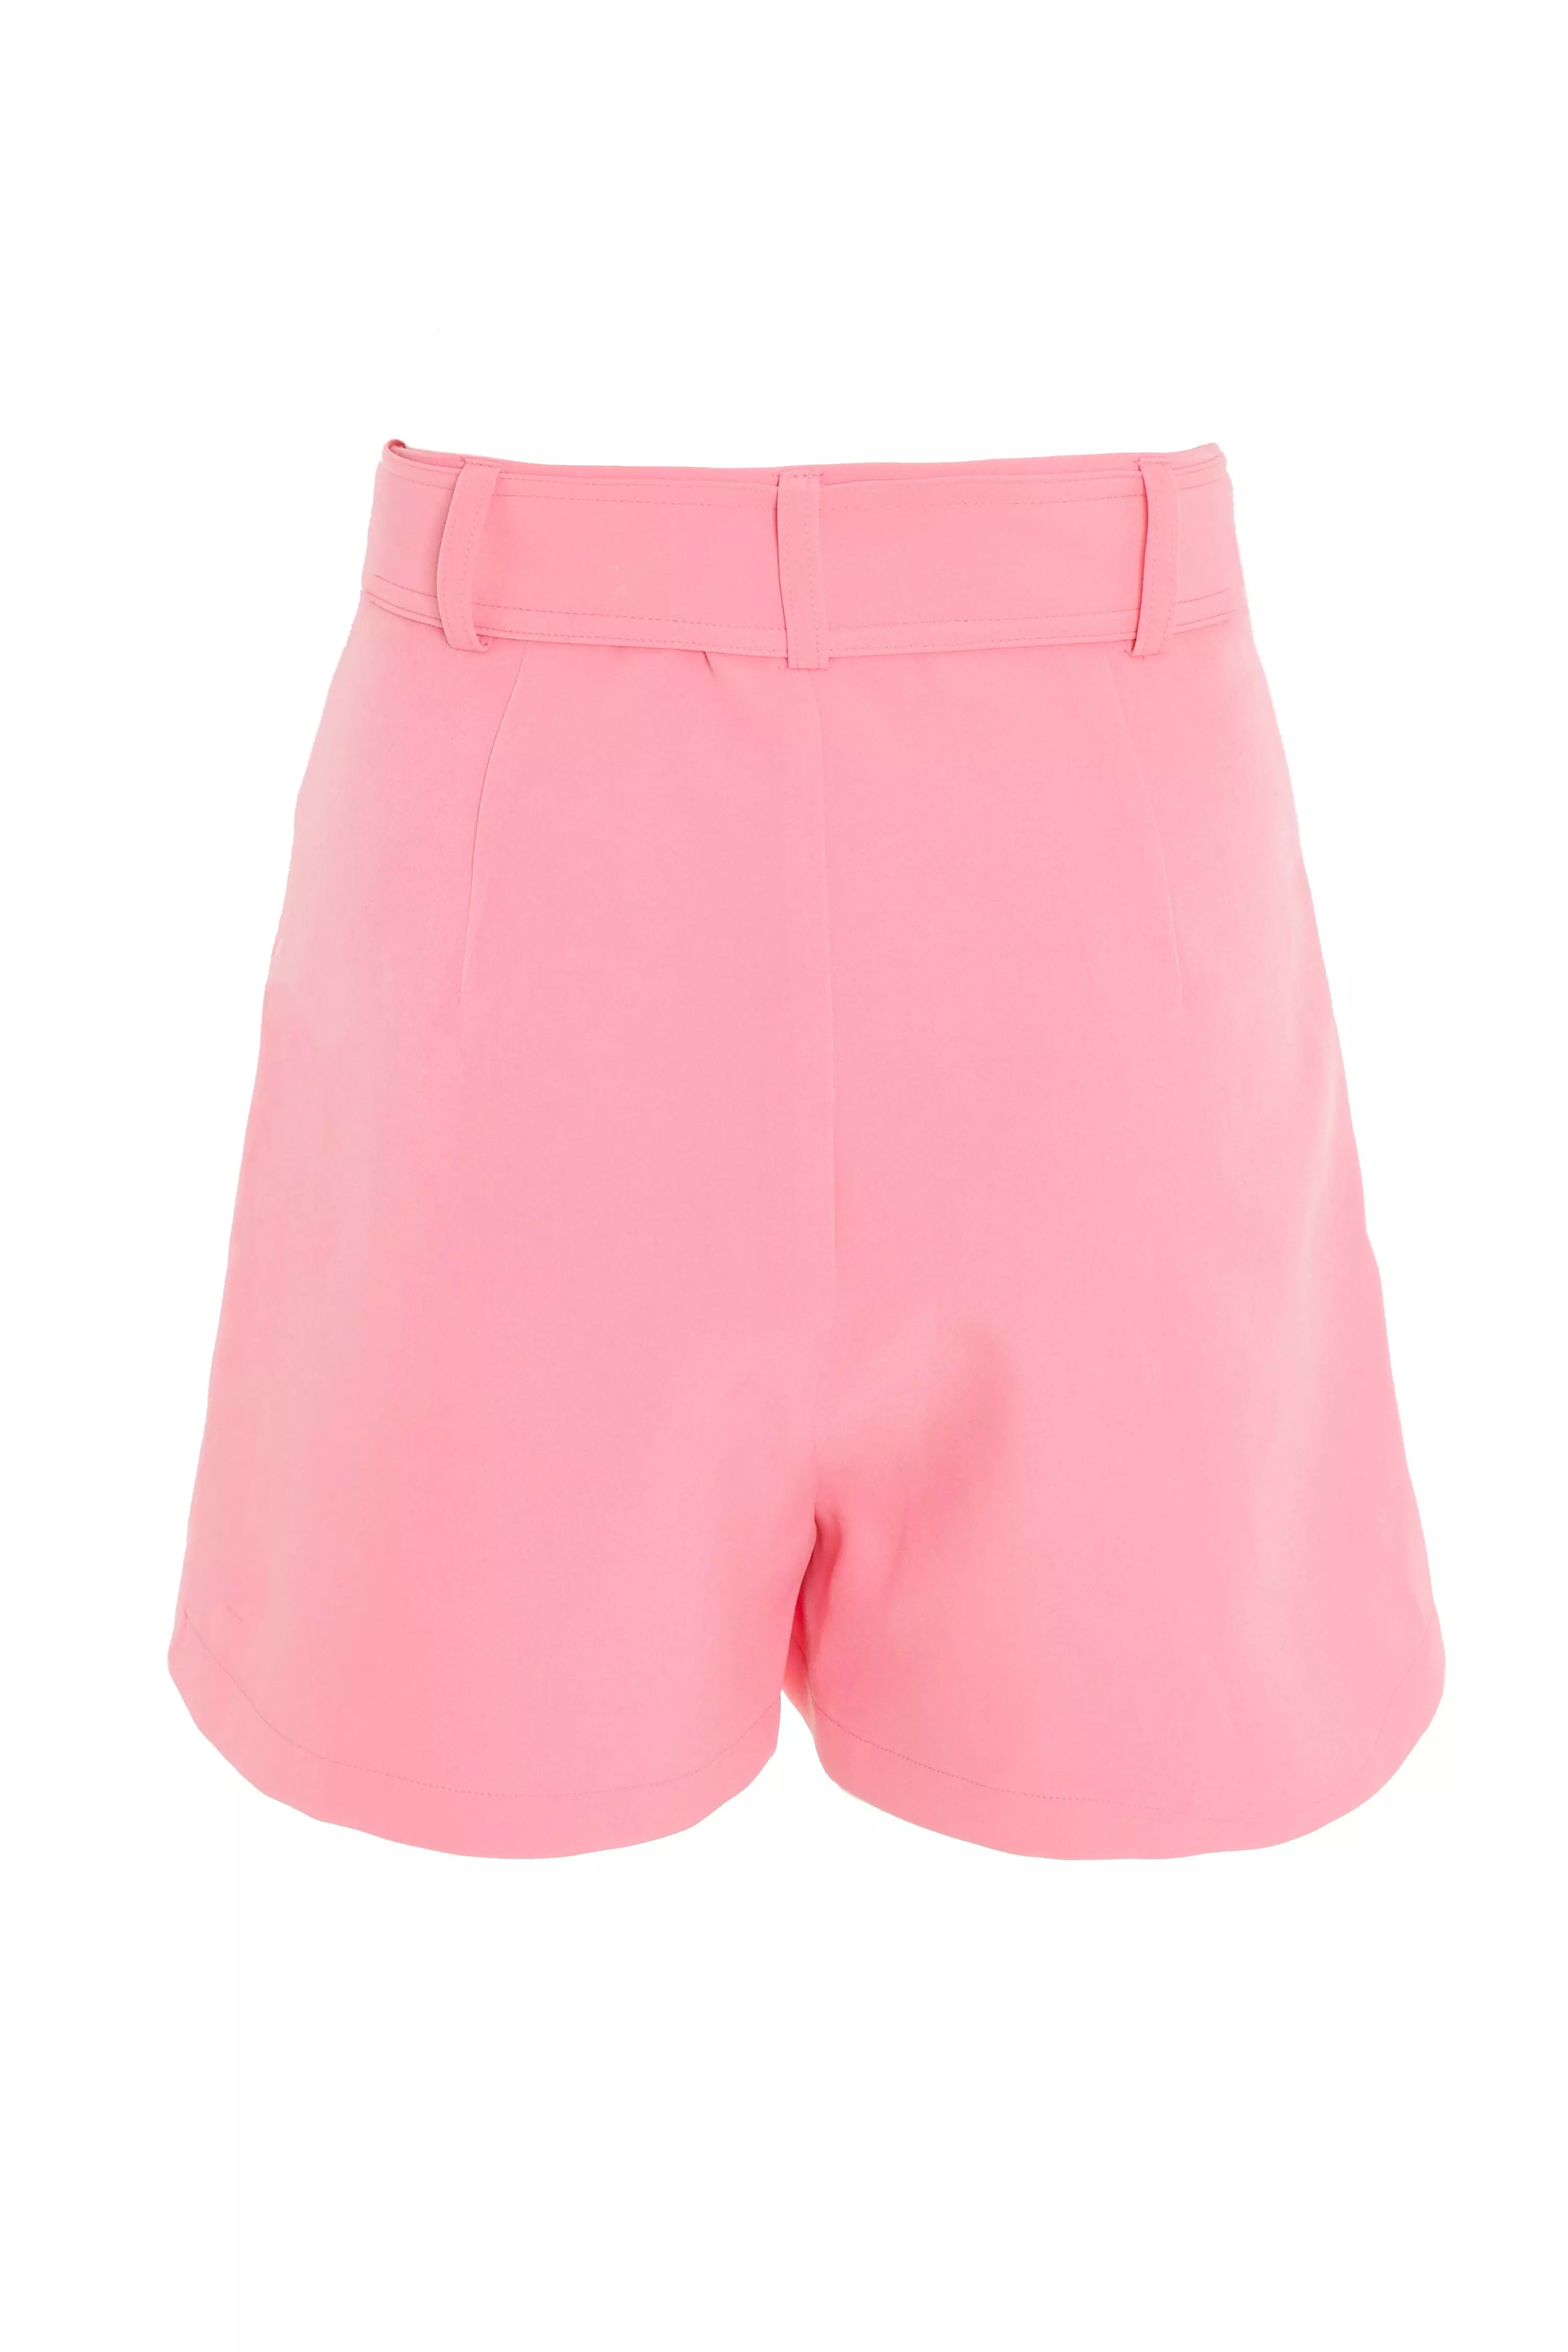 Pink High Waist Tailored Shorts - QUIZ Clothing